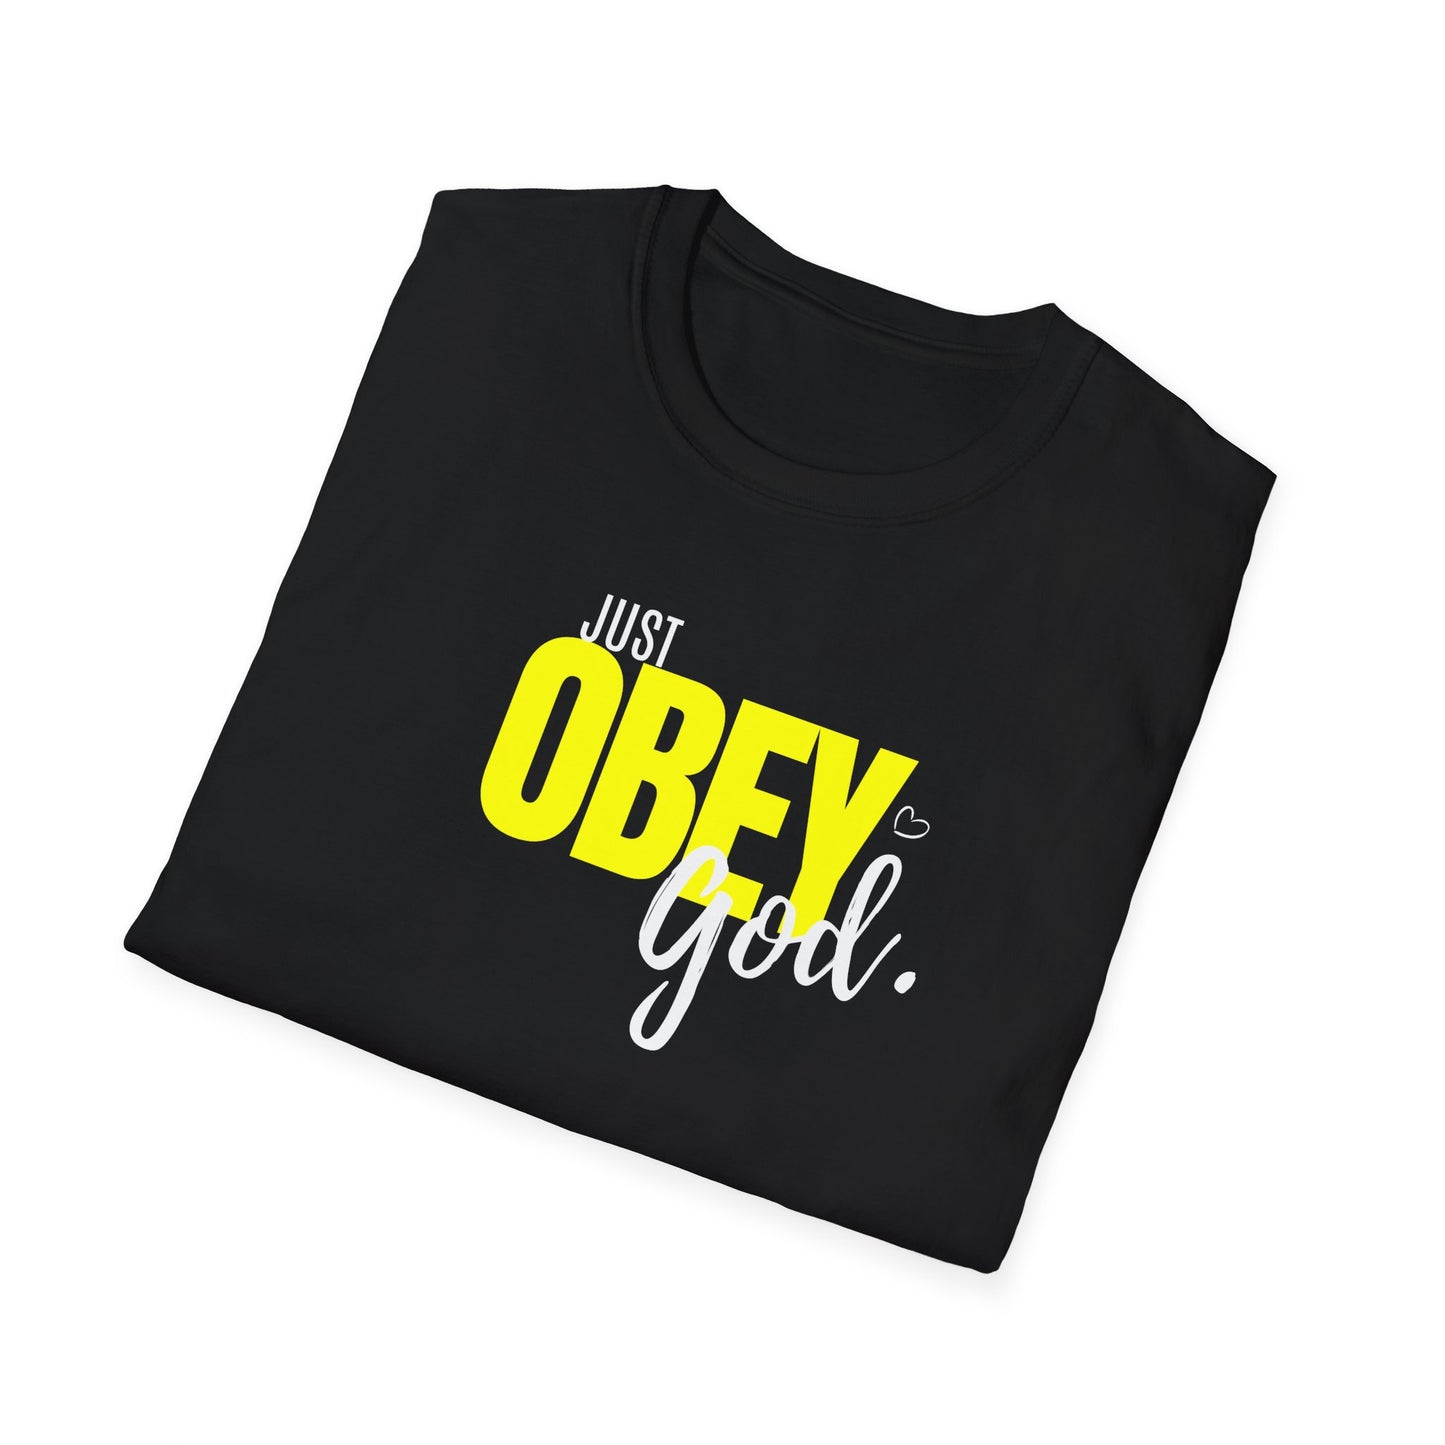 Just Obey God Tee